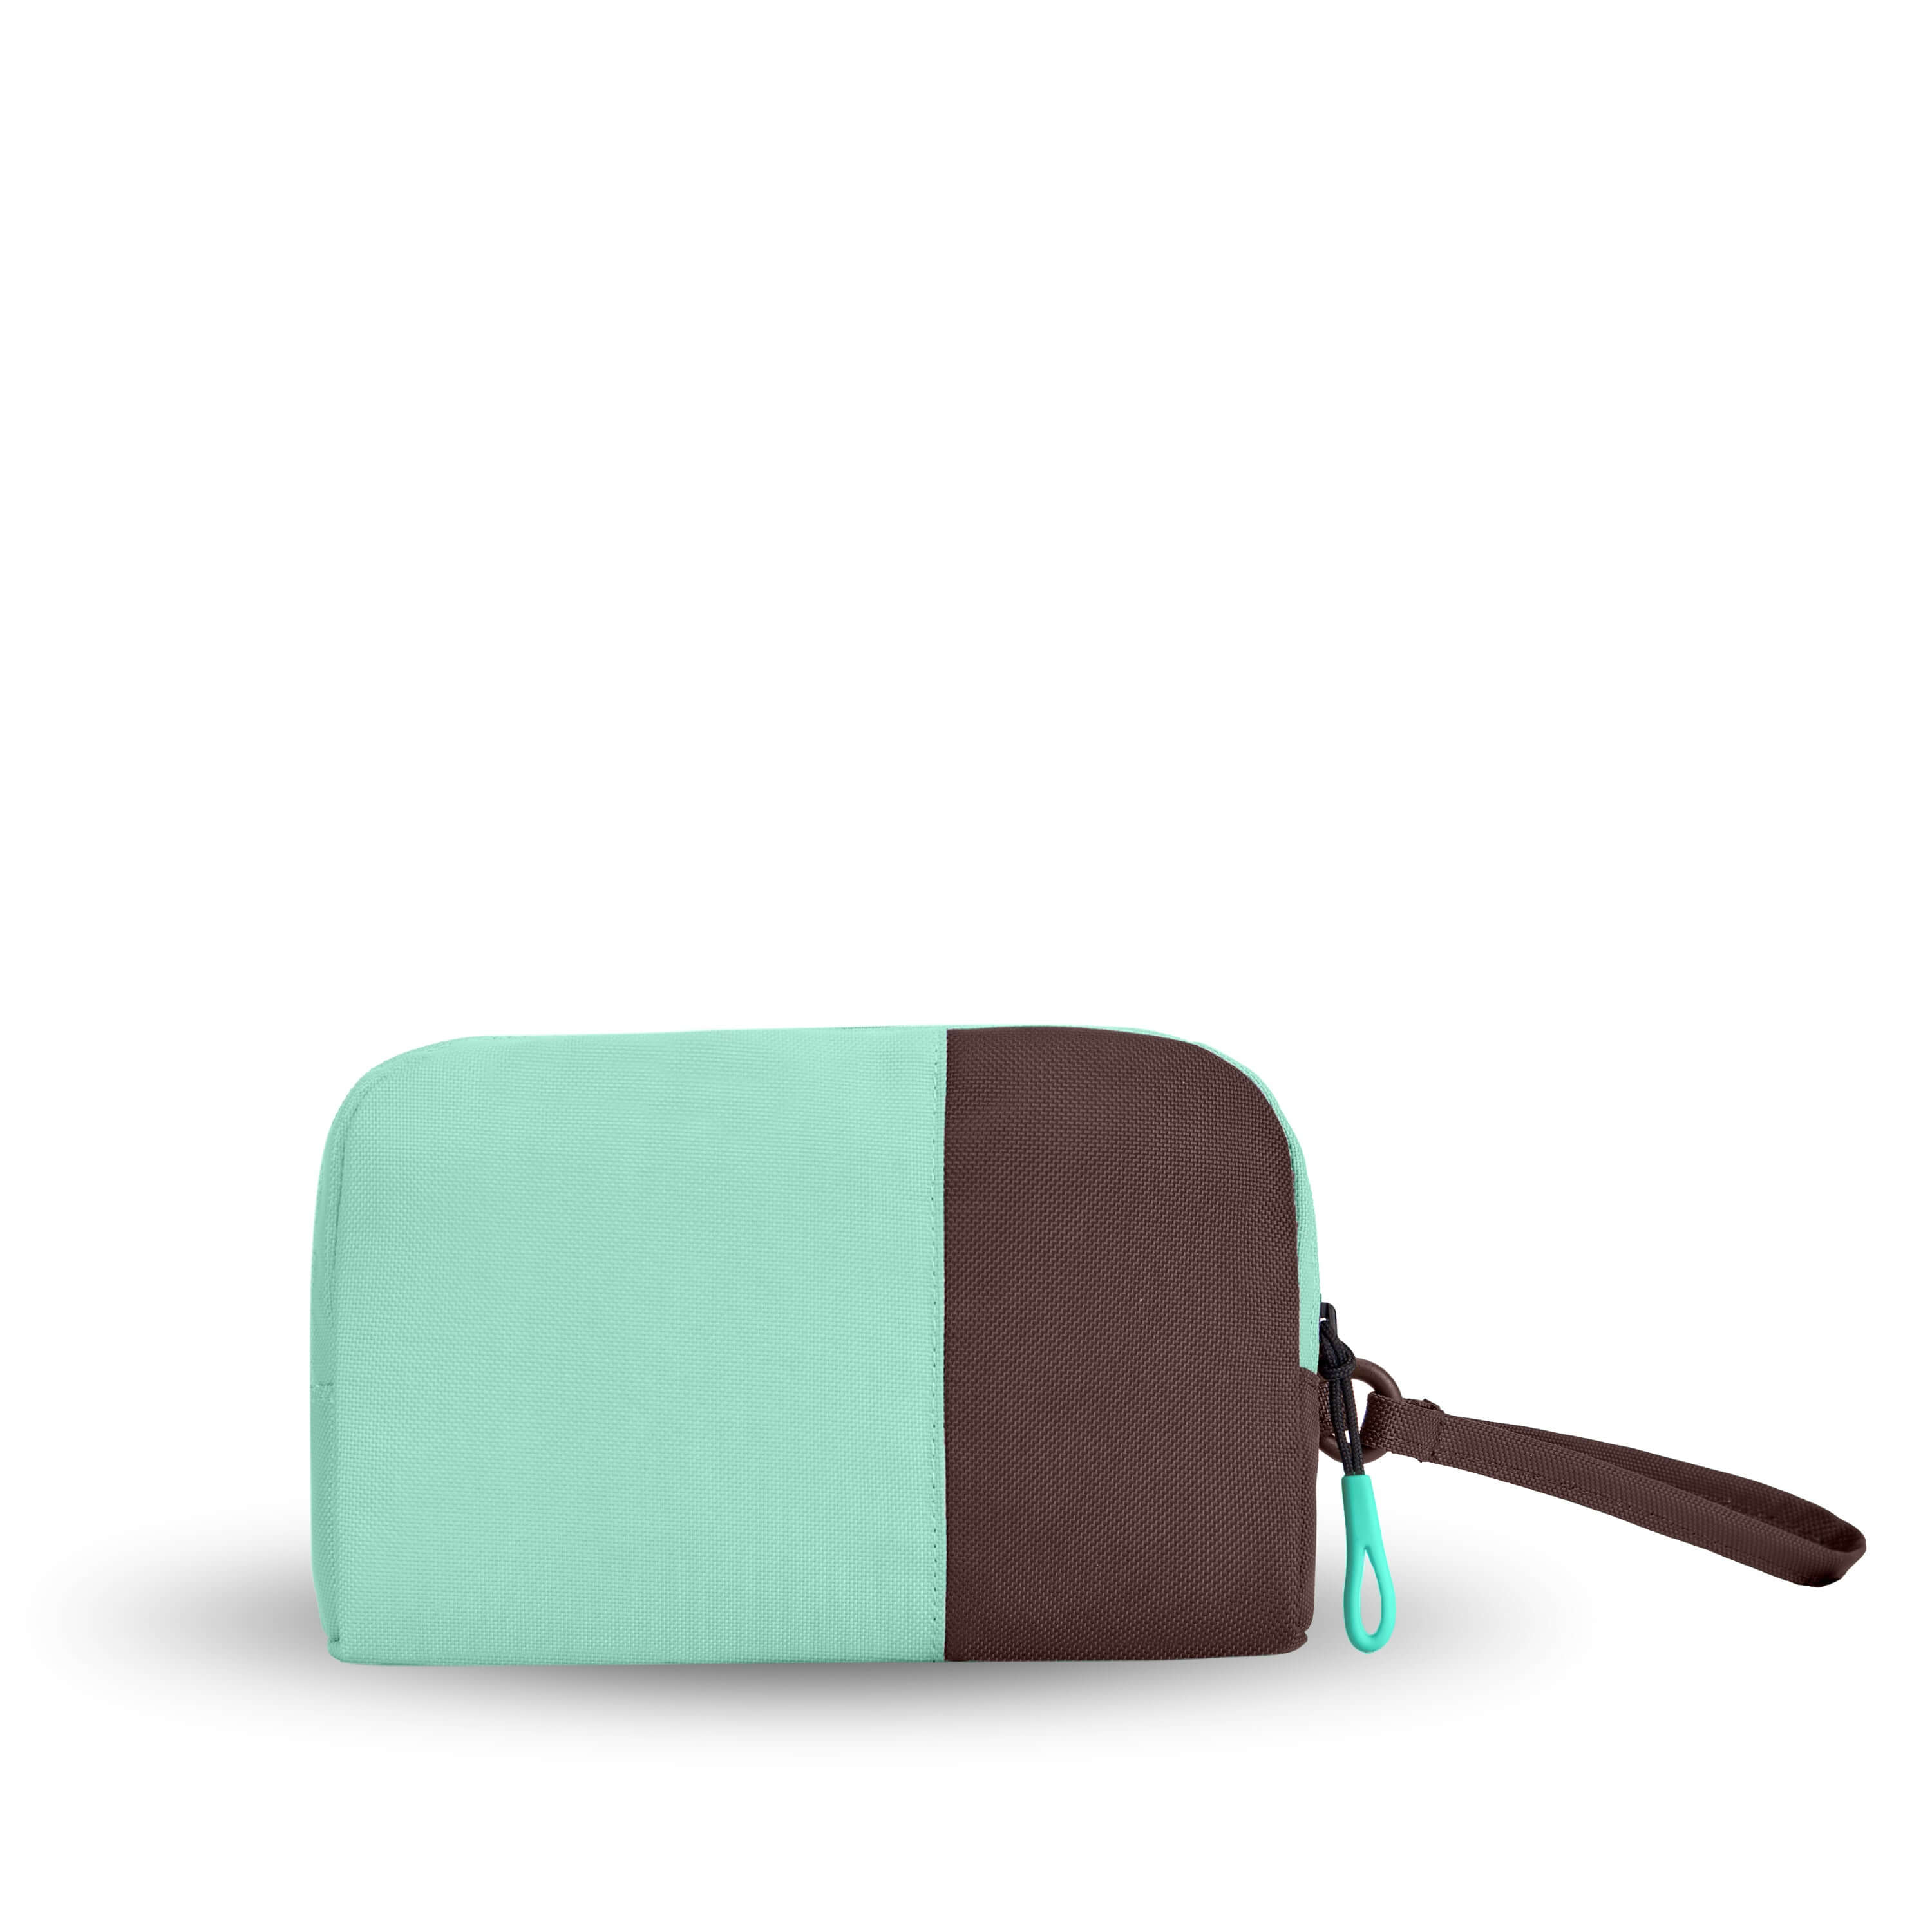 Back view of Sherpani travel accessory, the Jolie in Seagreen, in medium size. The pouch is two-toned in light green and brown. It features a brown wristlet strap and an easy-pull zipper accented in light green. 